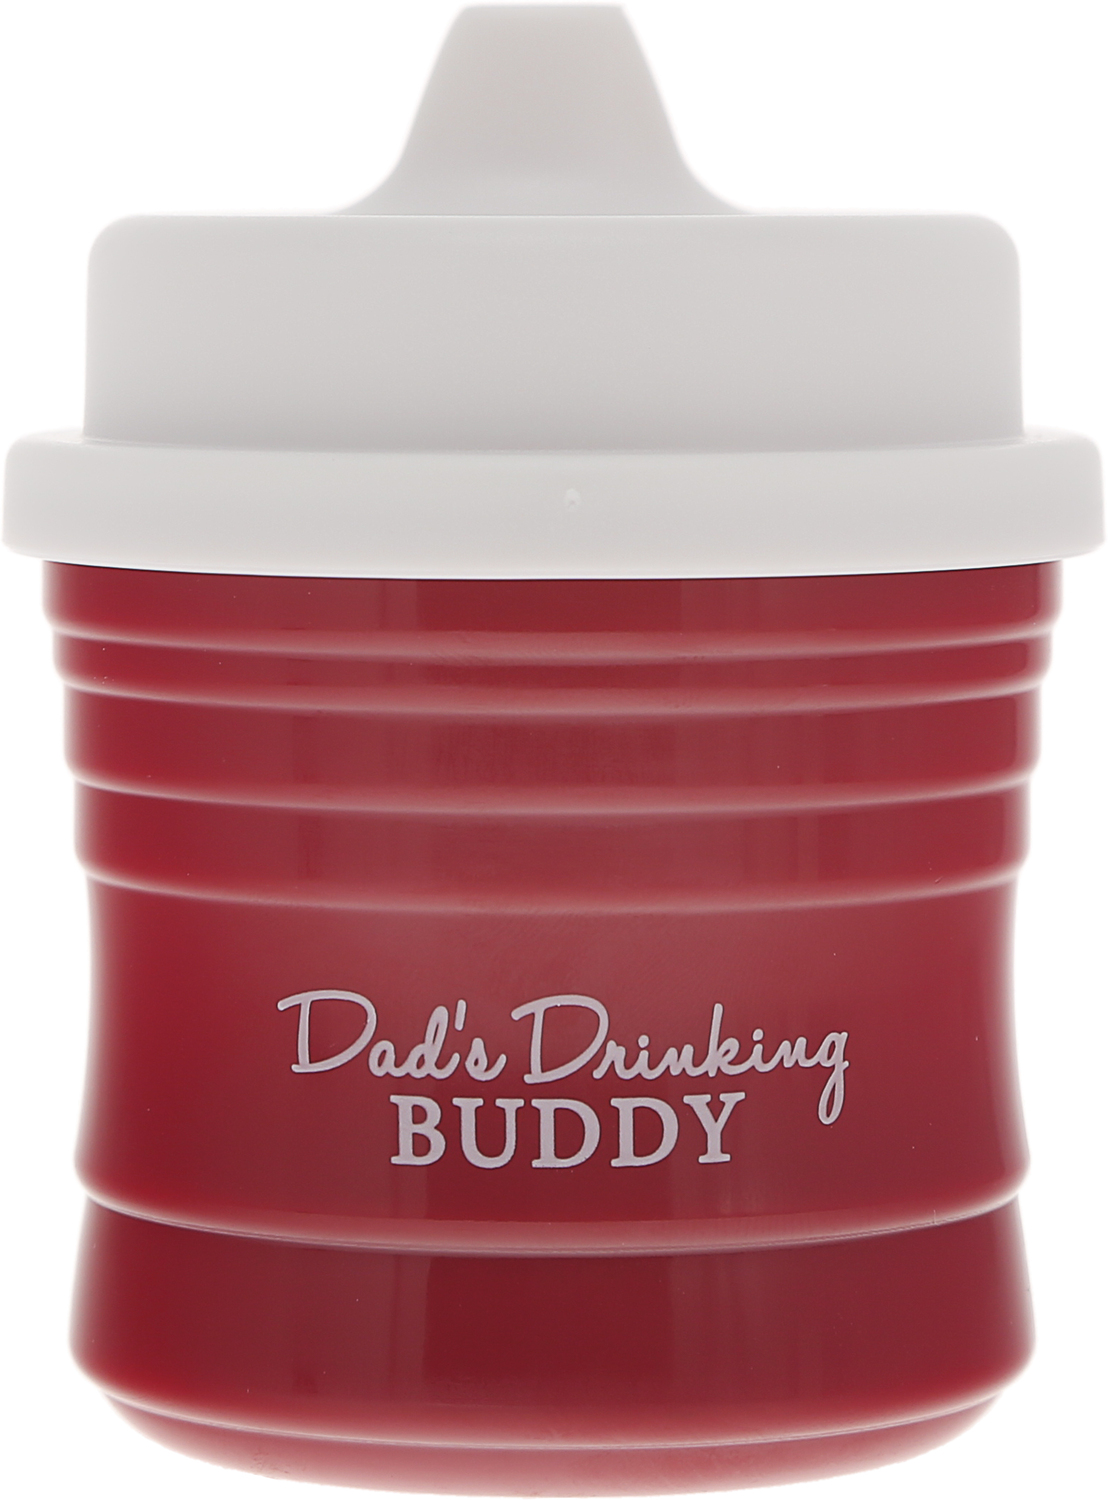 Dad's Buddy by A-Parent-ly - Dad's Buddy - 7 oz Sippy Party Cup